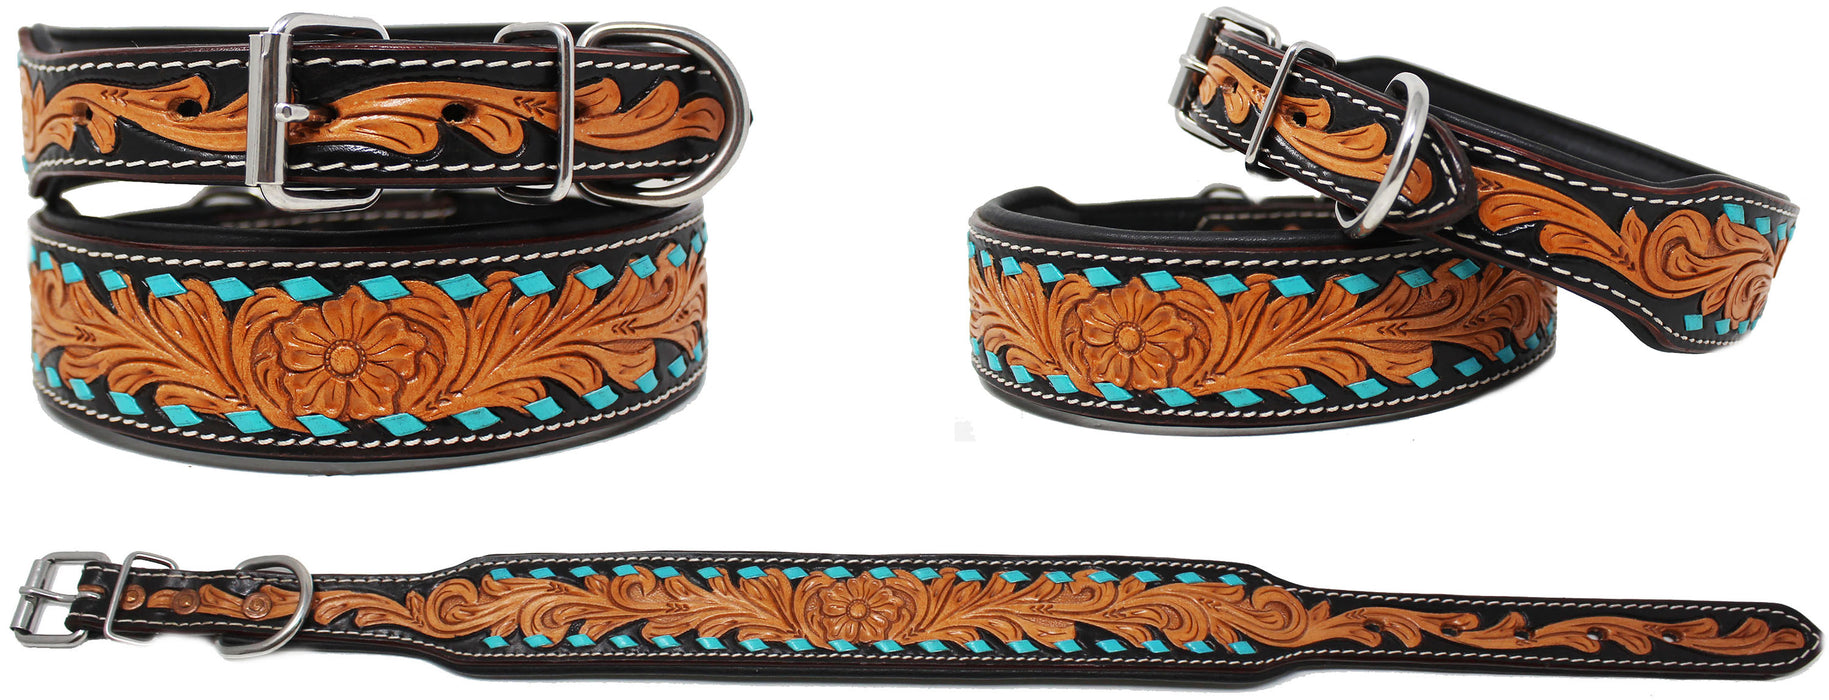 Turquoise Buck Stitch Tooled Padded Leather Dog Puppy Collar 60199